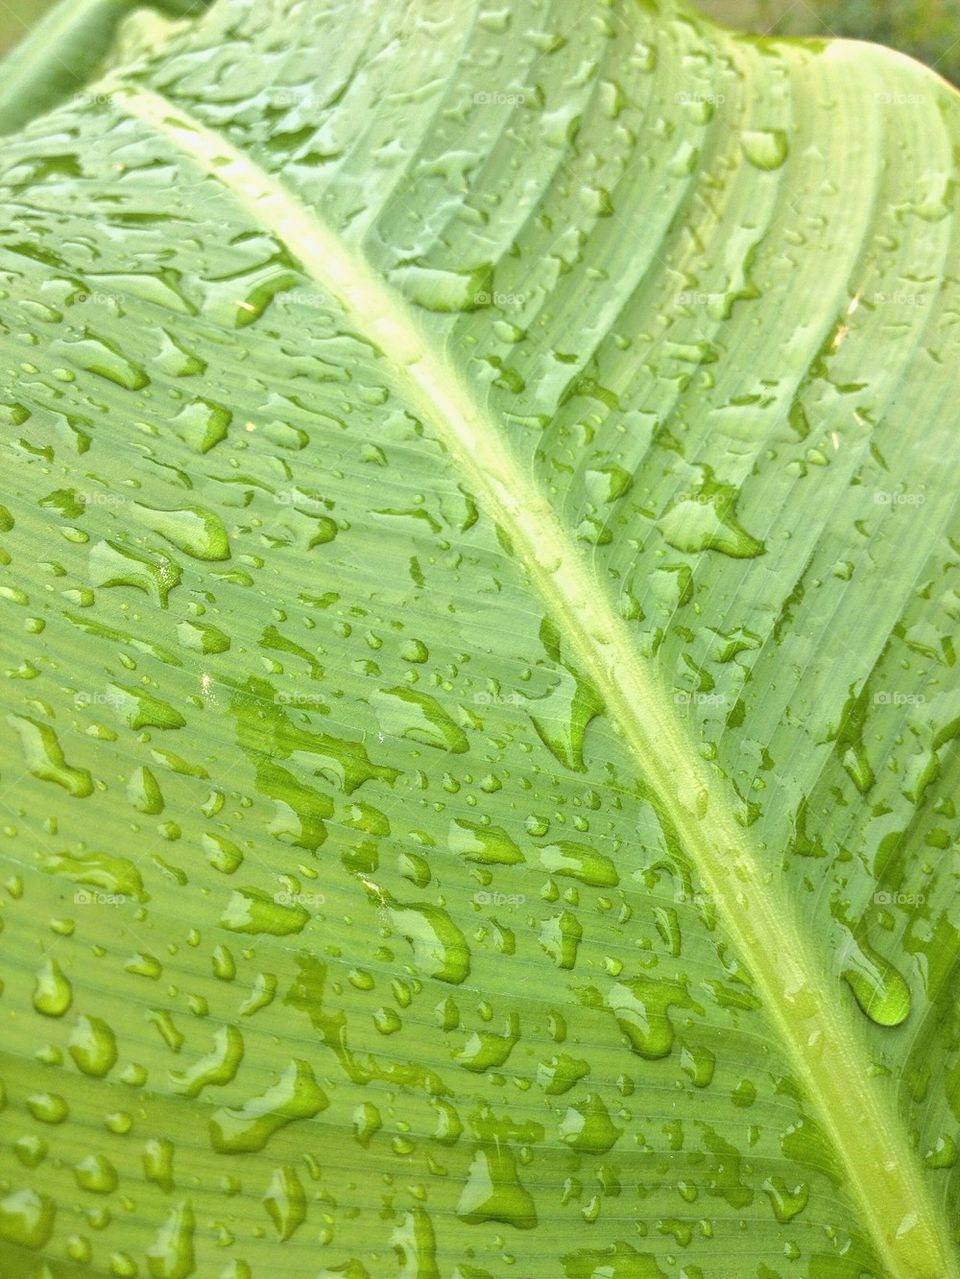 Water drops on green leaf surface